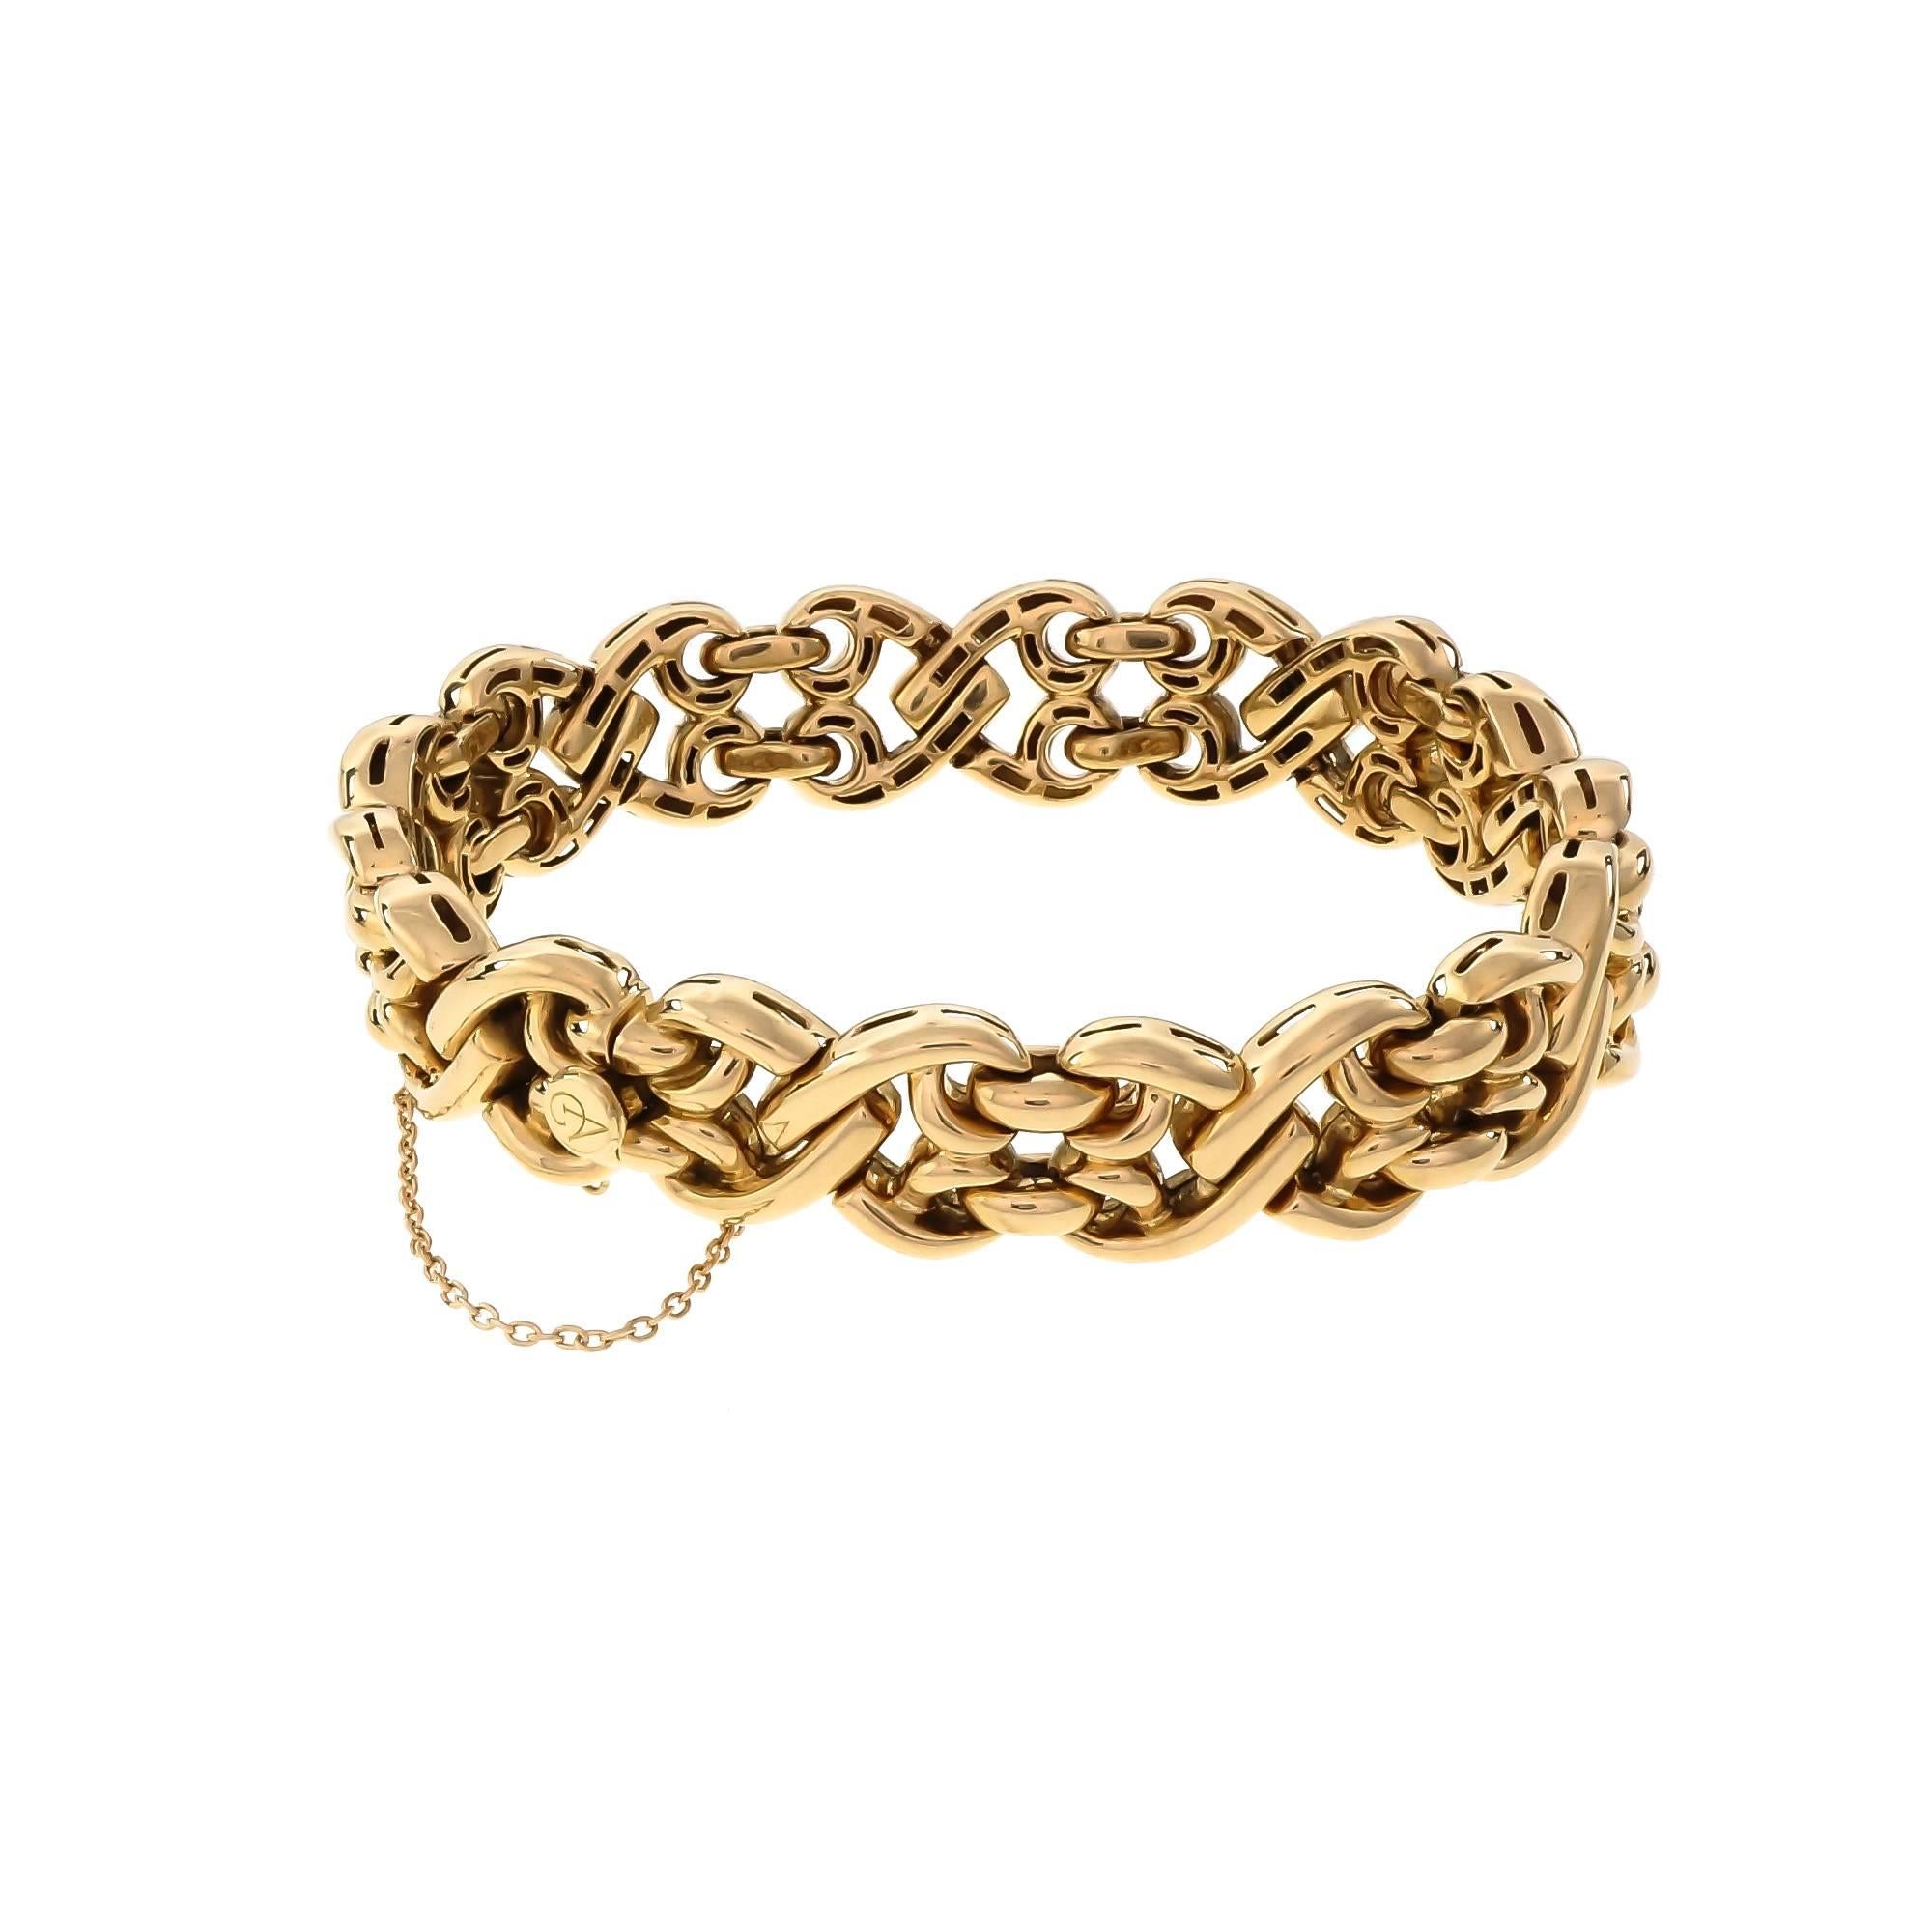 18k yellow gold heavy Italian hinged fancy link bracelet 14mm wide with built in hidden catch plus safety chain. Hallmark on the catch that we do not recognize. Circa 1970s.

18k yellow gold
Length: 7.75 inches
Tested: 18k
Stamped: 750
74.6